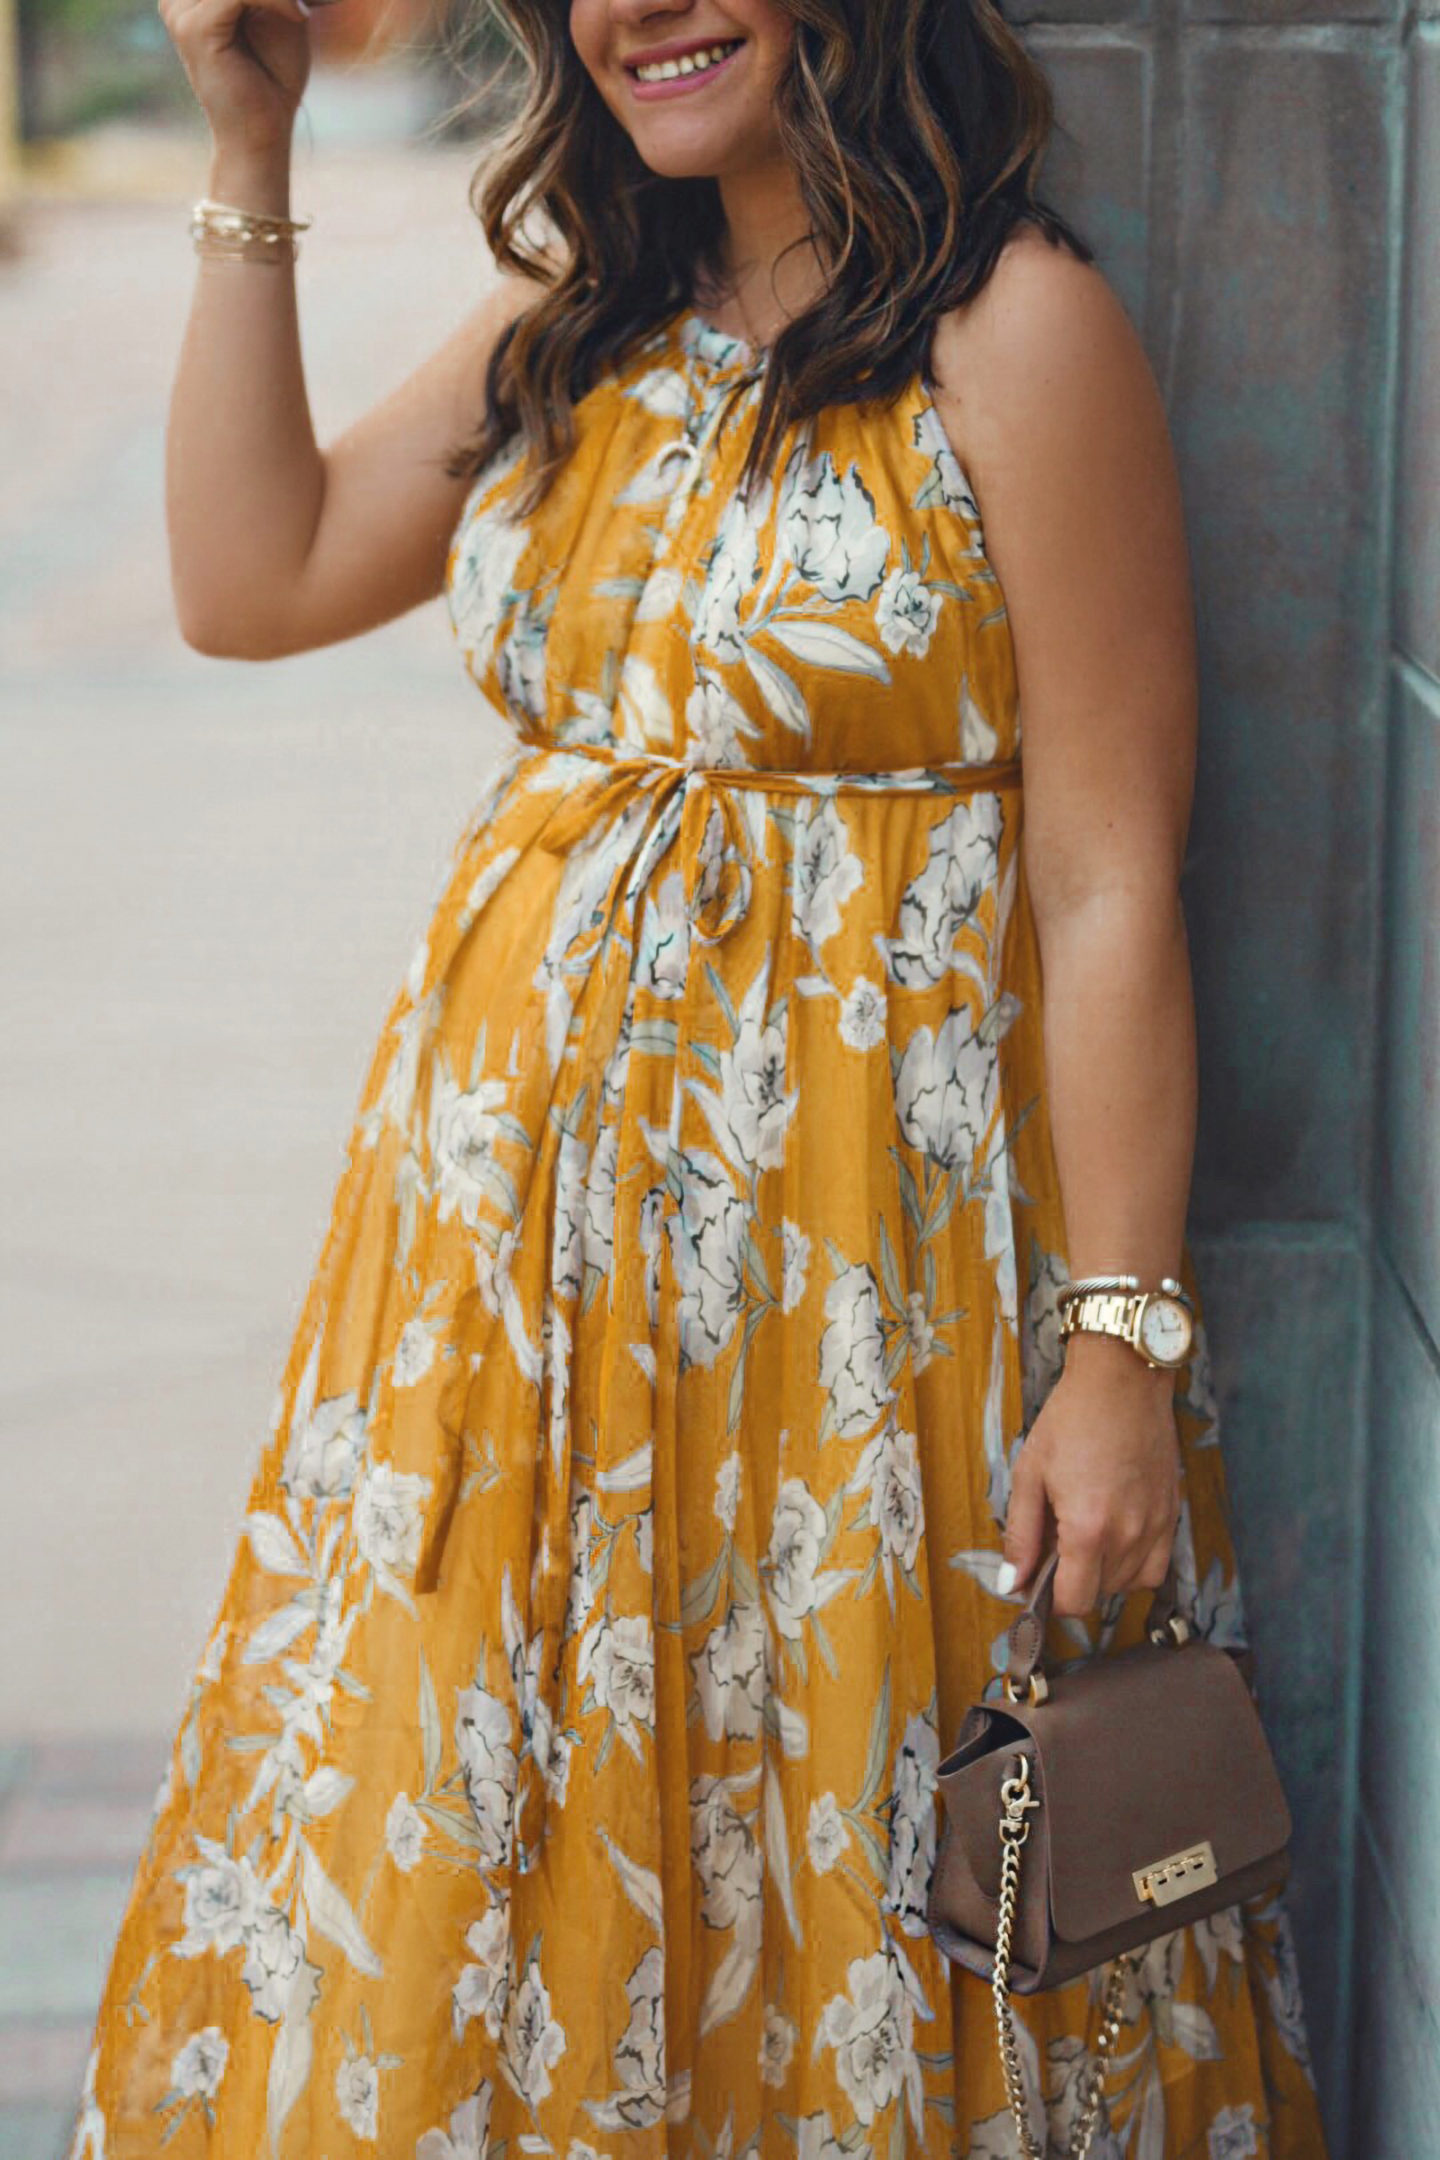 THE FLORAL DRESS YOU NEED TO SPICE UP YOUR SUMMER WARDROBE, CHIC TALK